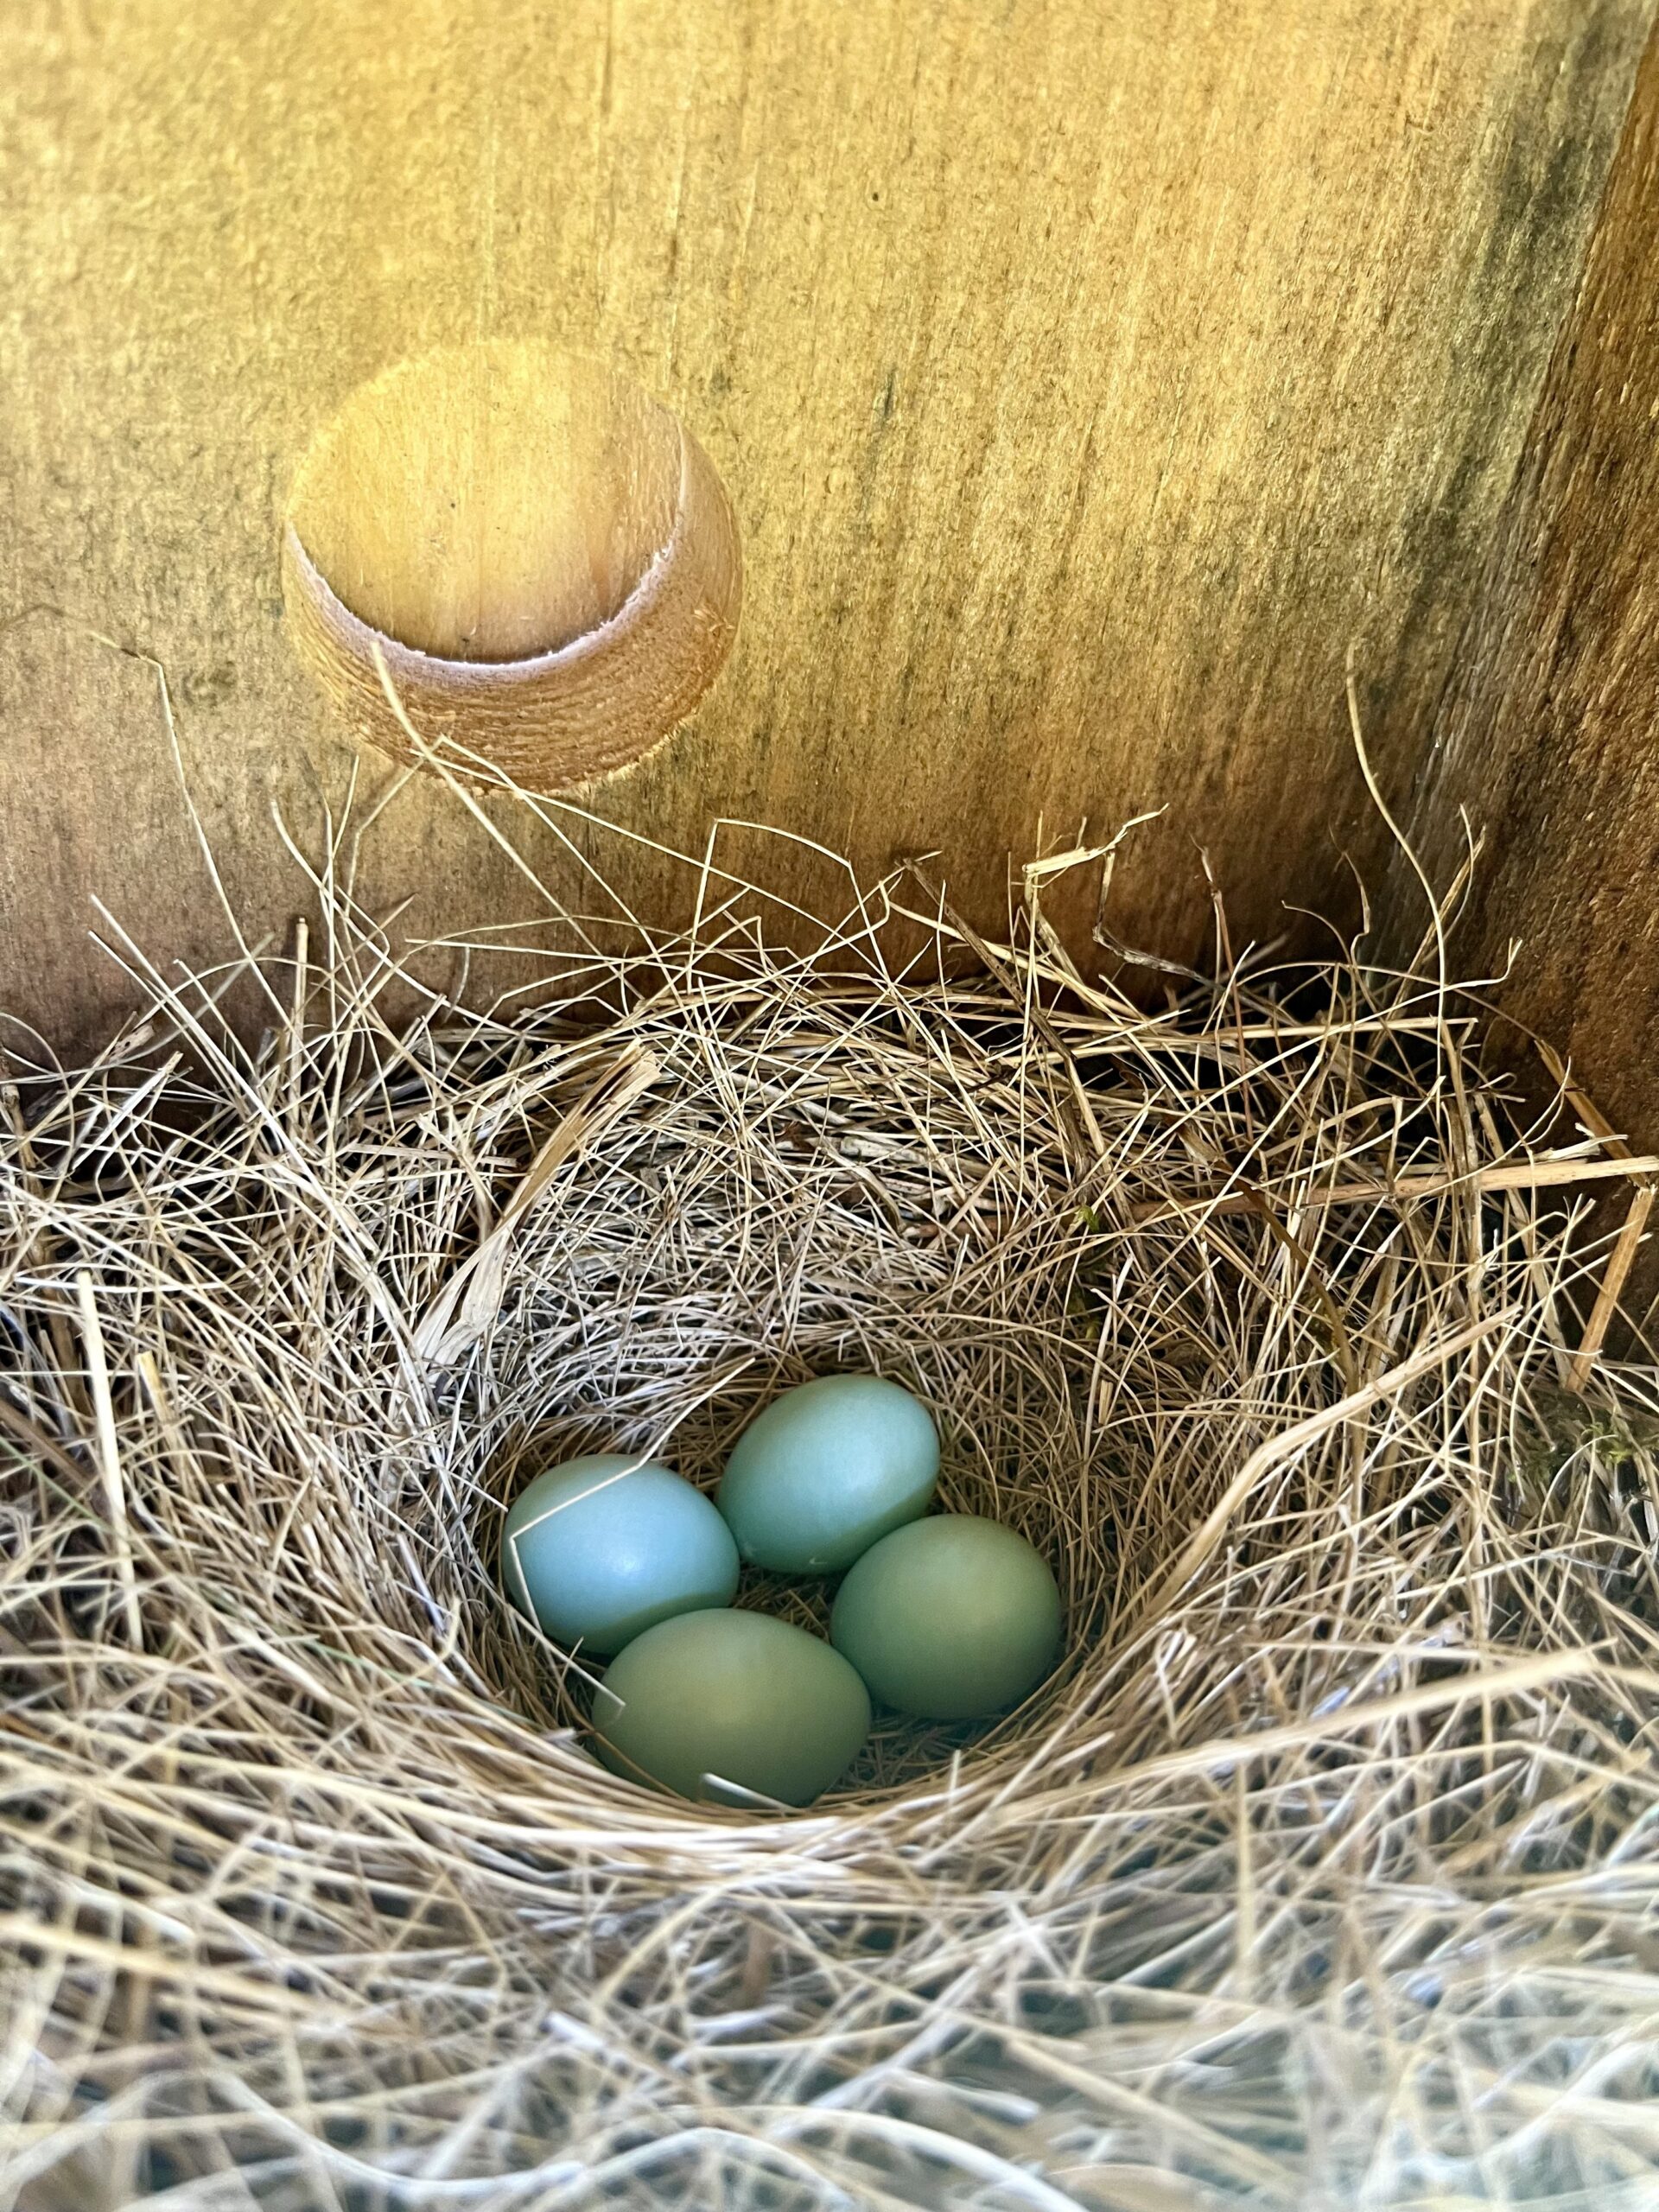 Four blue eggs sit in a nest.